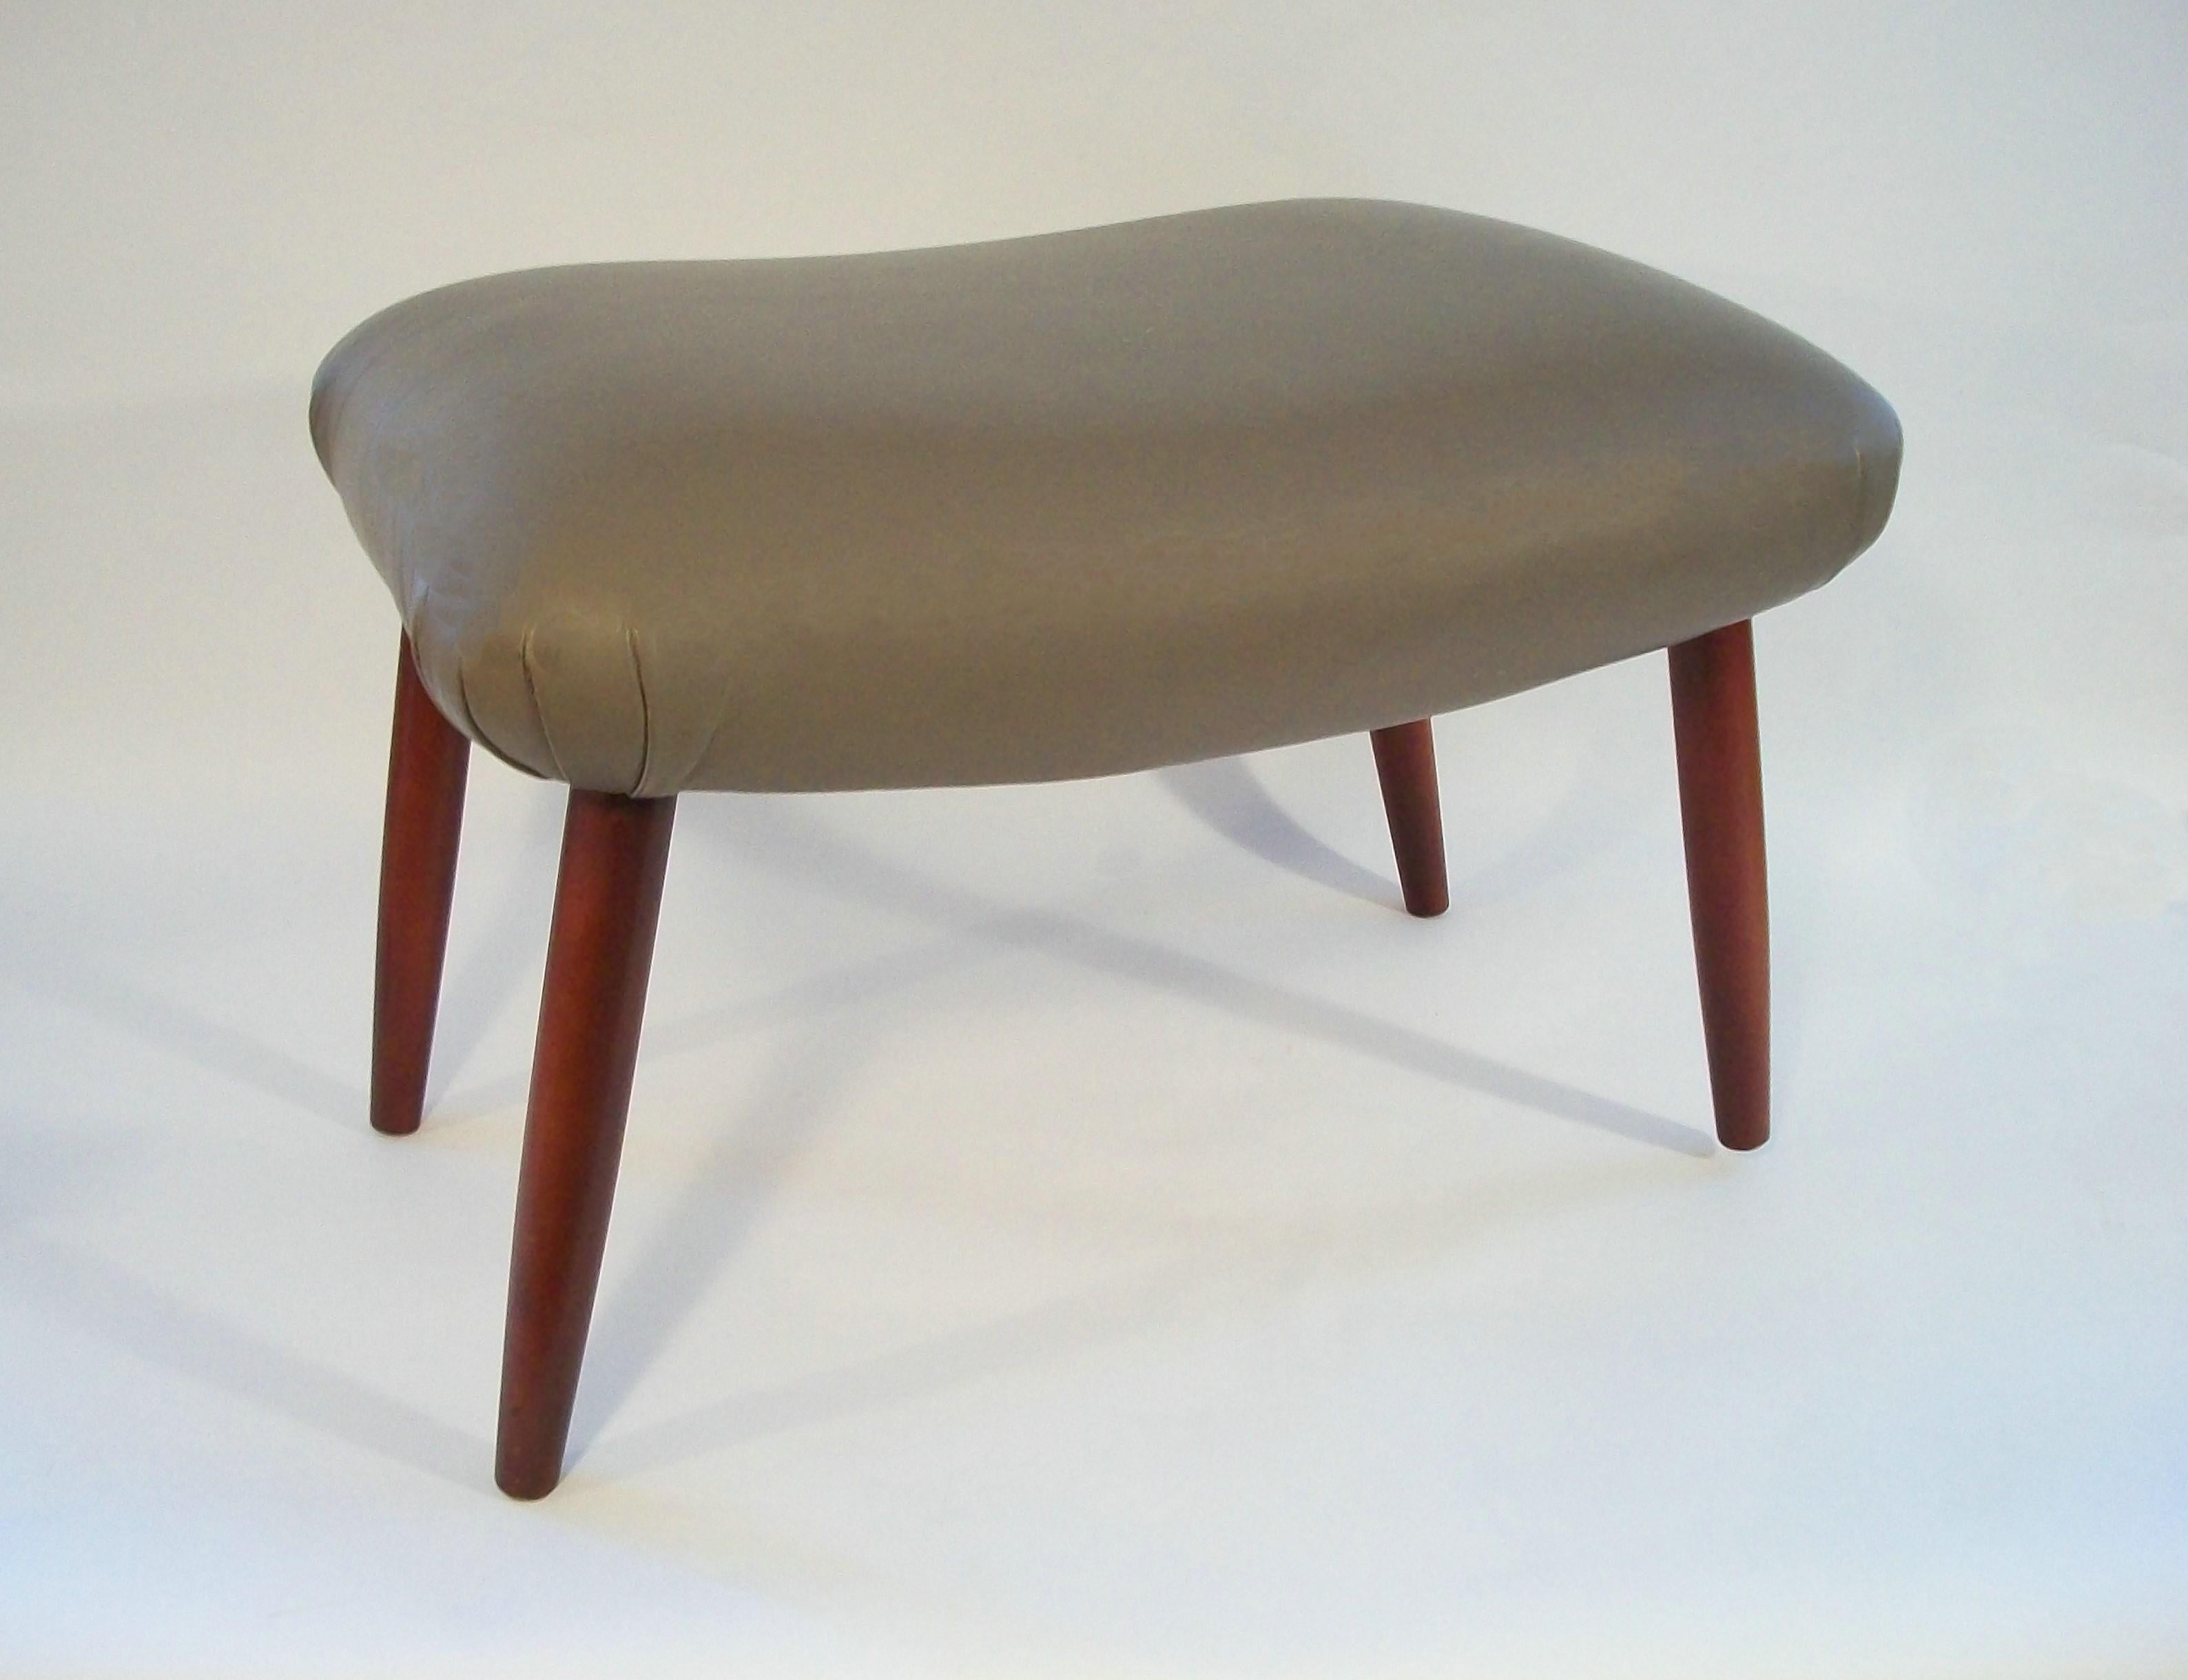 Mid Century Saddle Seat Foot Stool / Ottoman - Leather Upholstery - Circa 1980's In Good Condition For Sale In Chatham, ON